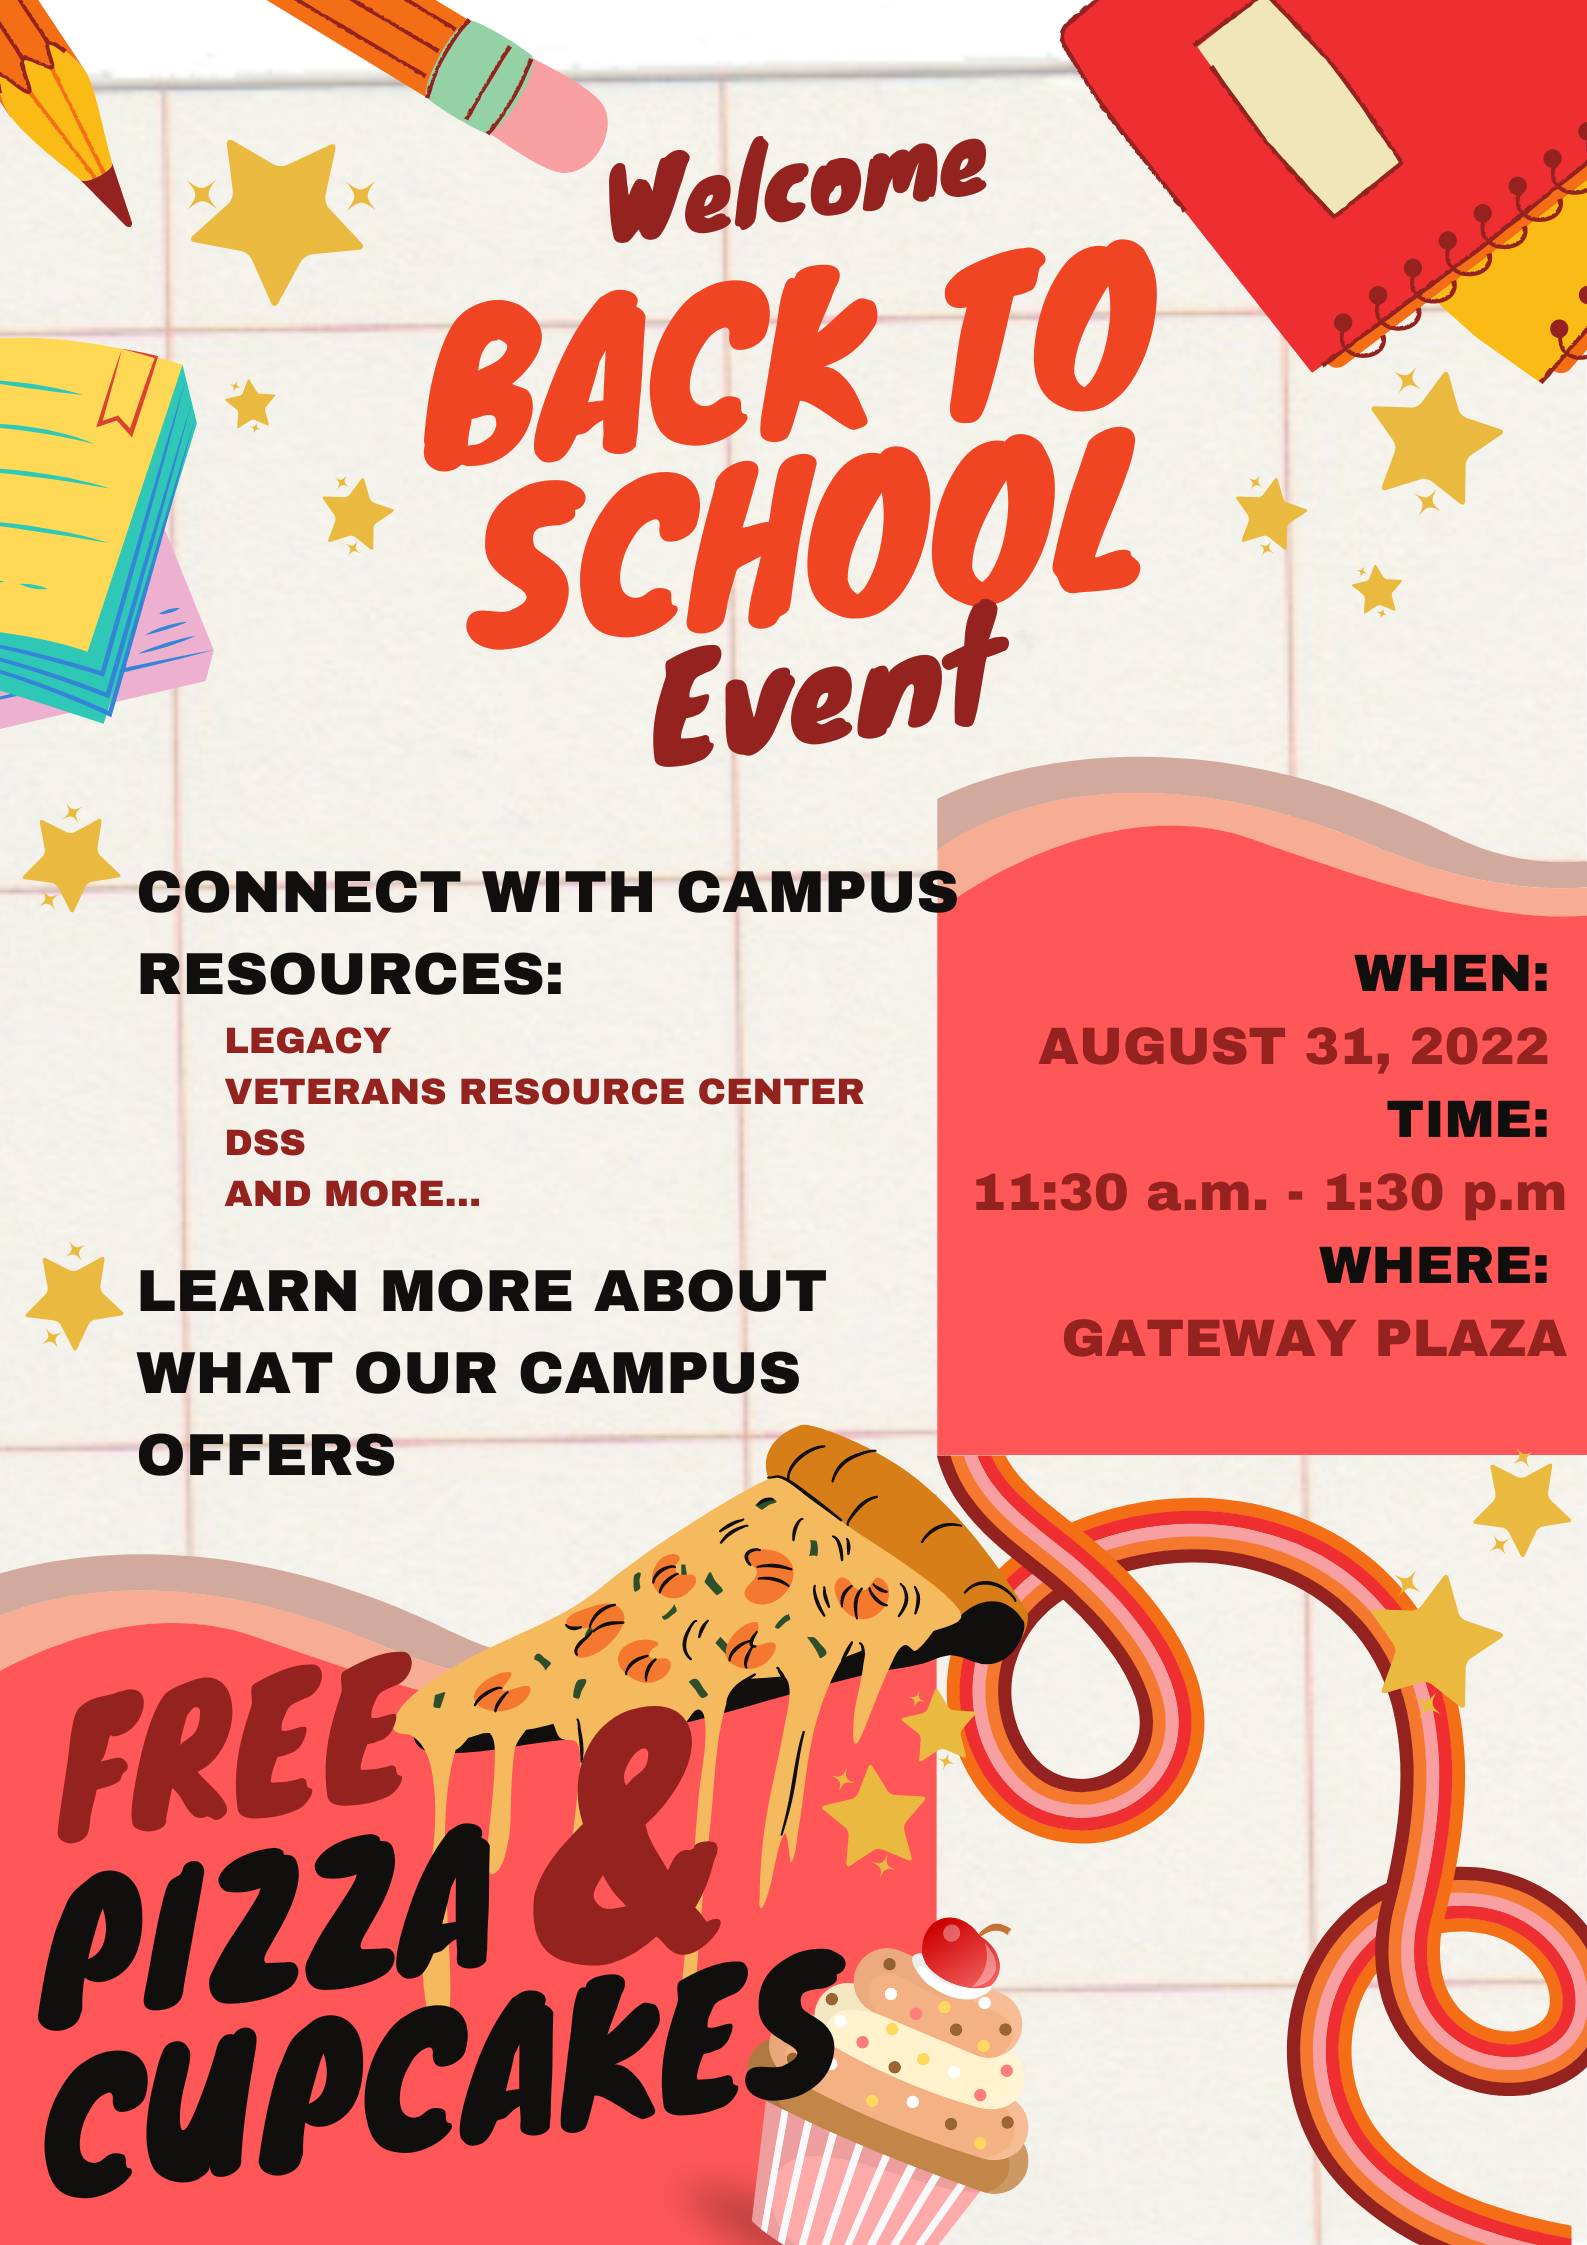 Back to school event flyer